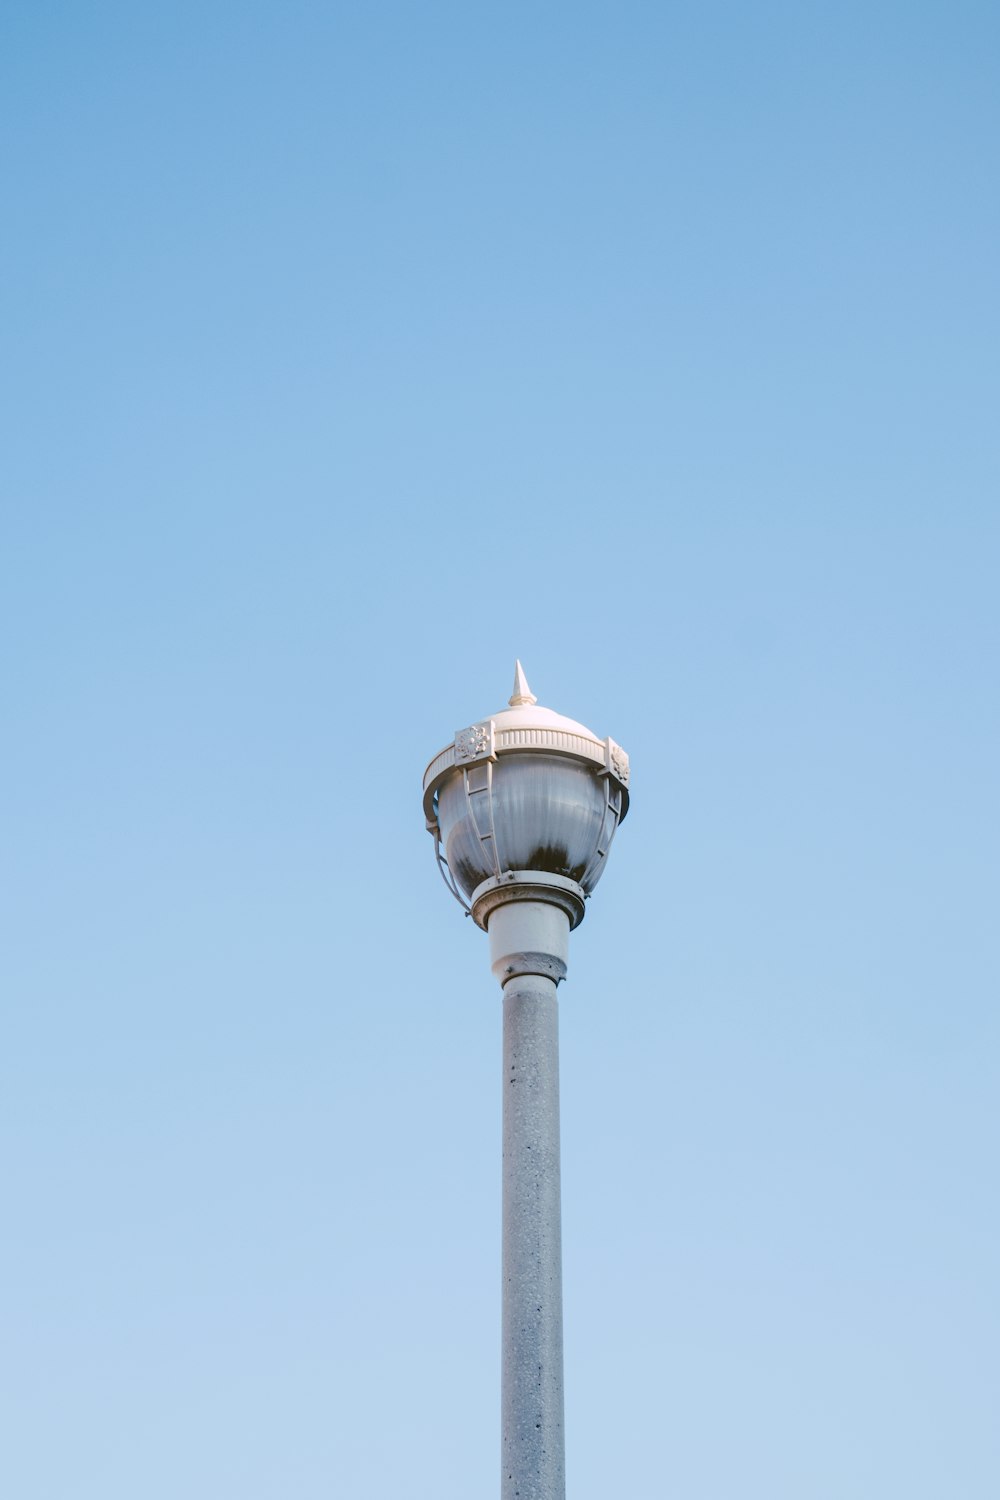 a light post with a light on top